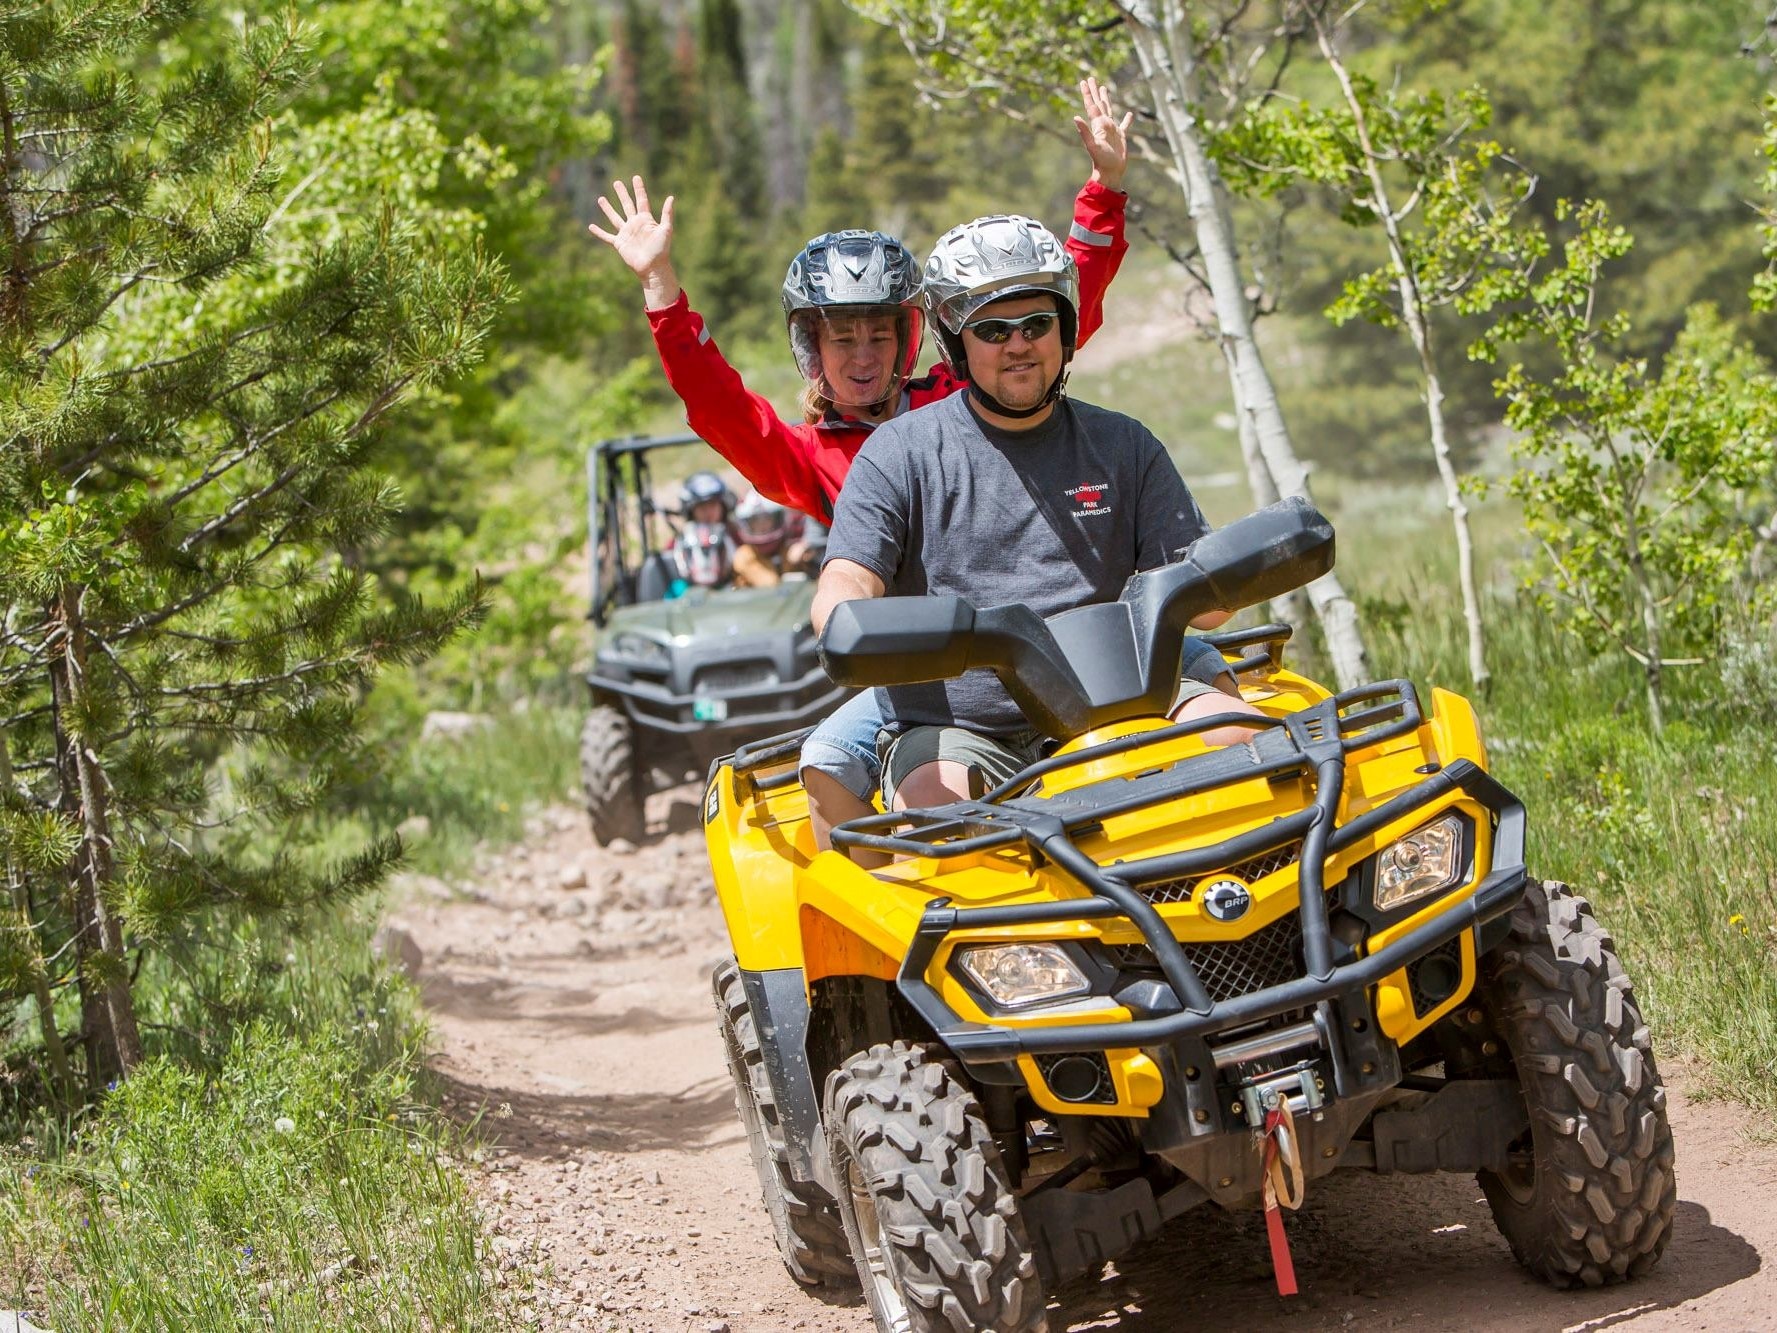 Choose which trails to explore in Kamas, UT